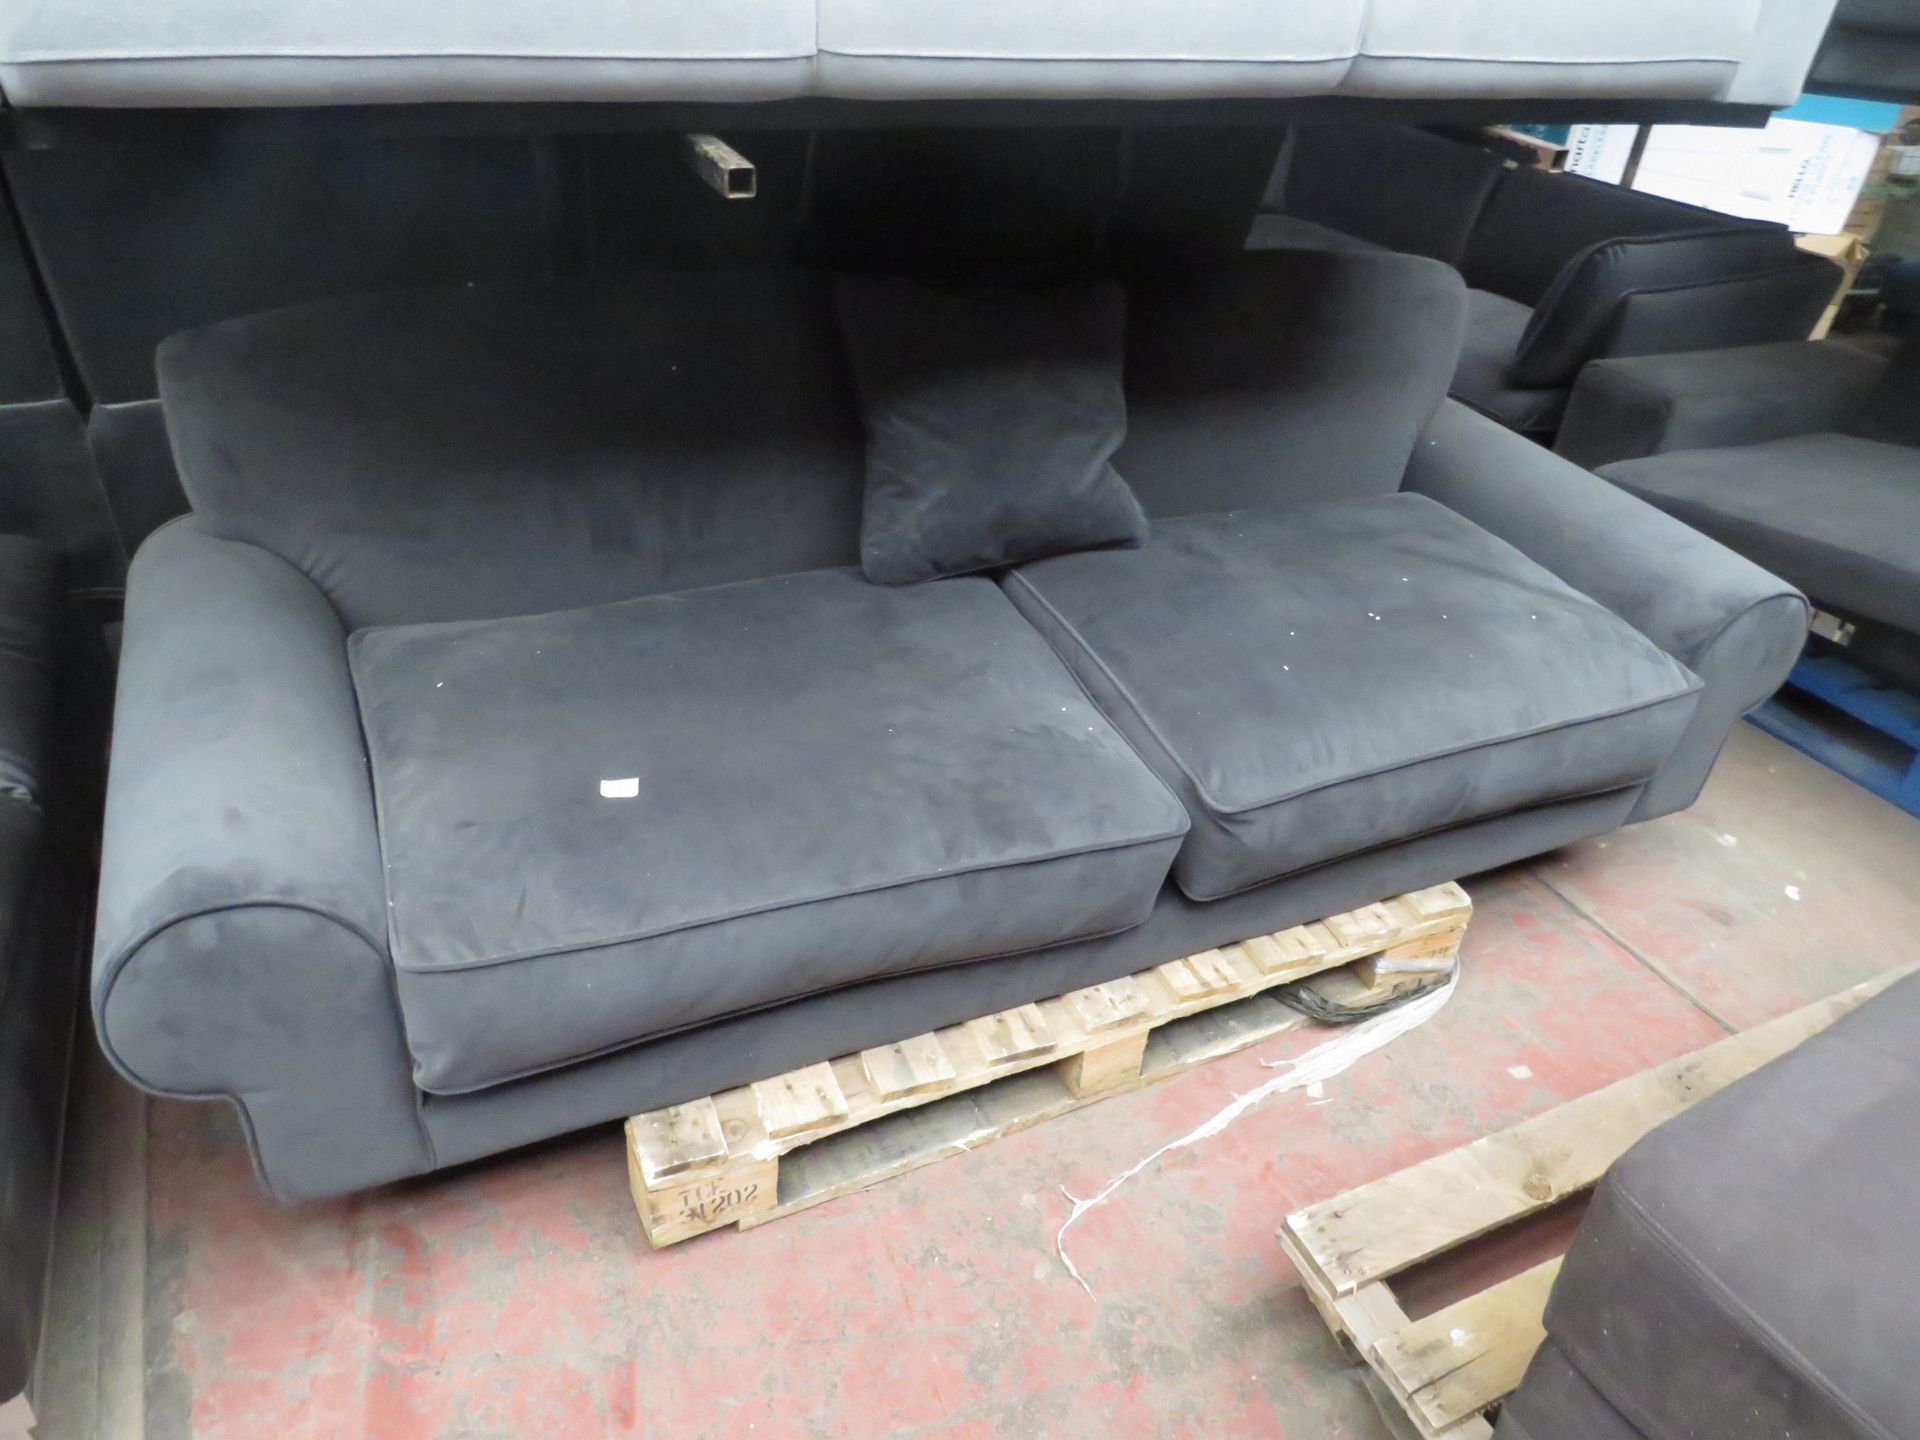 | 1x | SWOON 3 SEATER SOFA | ITEM HAS BEEN REFURBISHED AS THIS IS NOTICABLE ON THE BACK REST | RRP